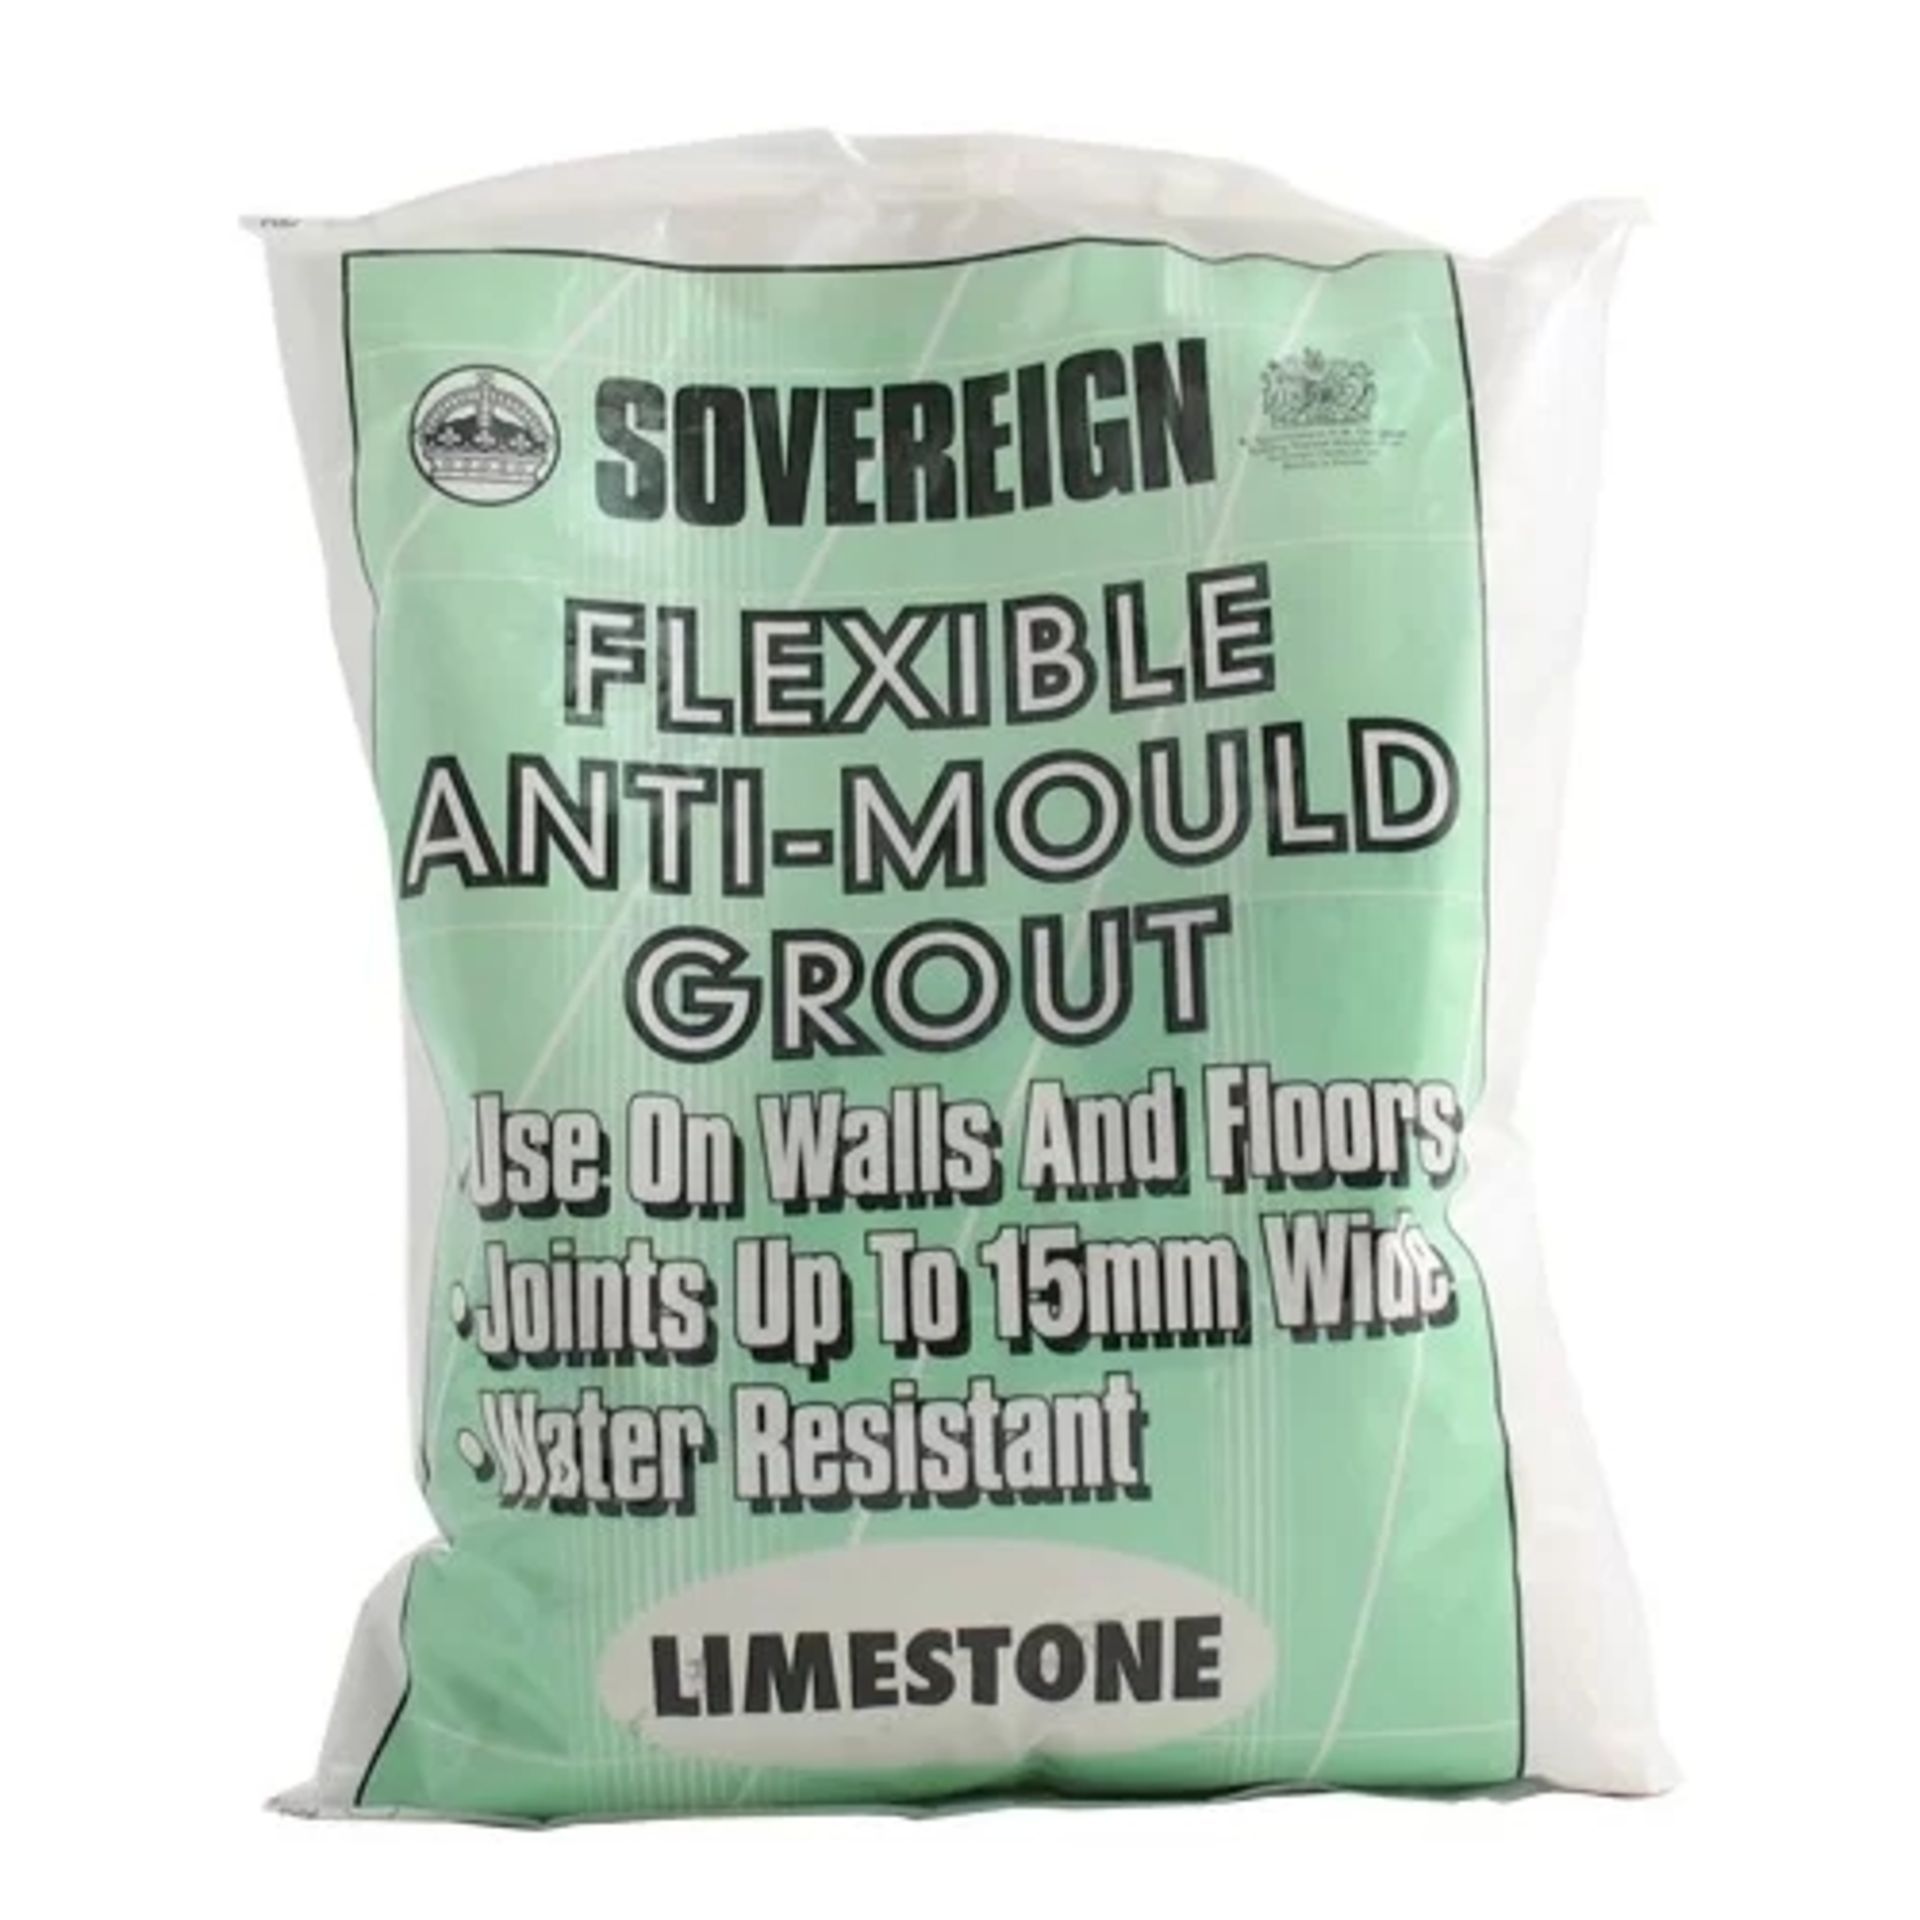 30x BRAND NEW SOVEREIGN Anti-Mould Flexi Grout - WHITE 3kg. (R3-8) A flexible, hard, durable,